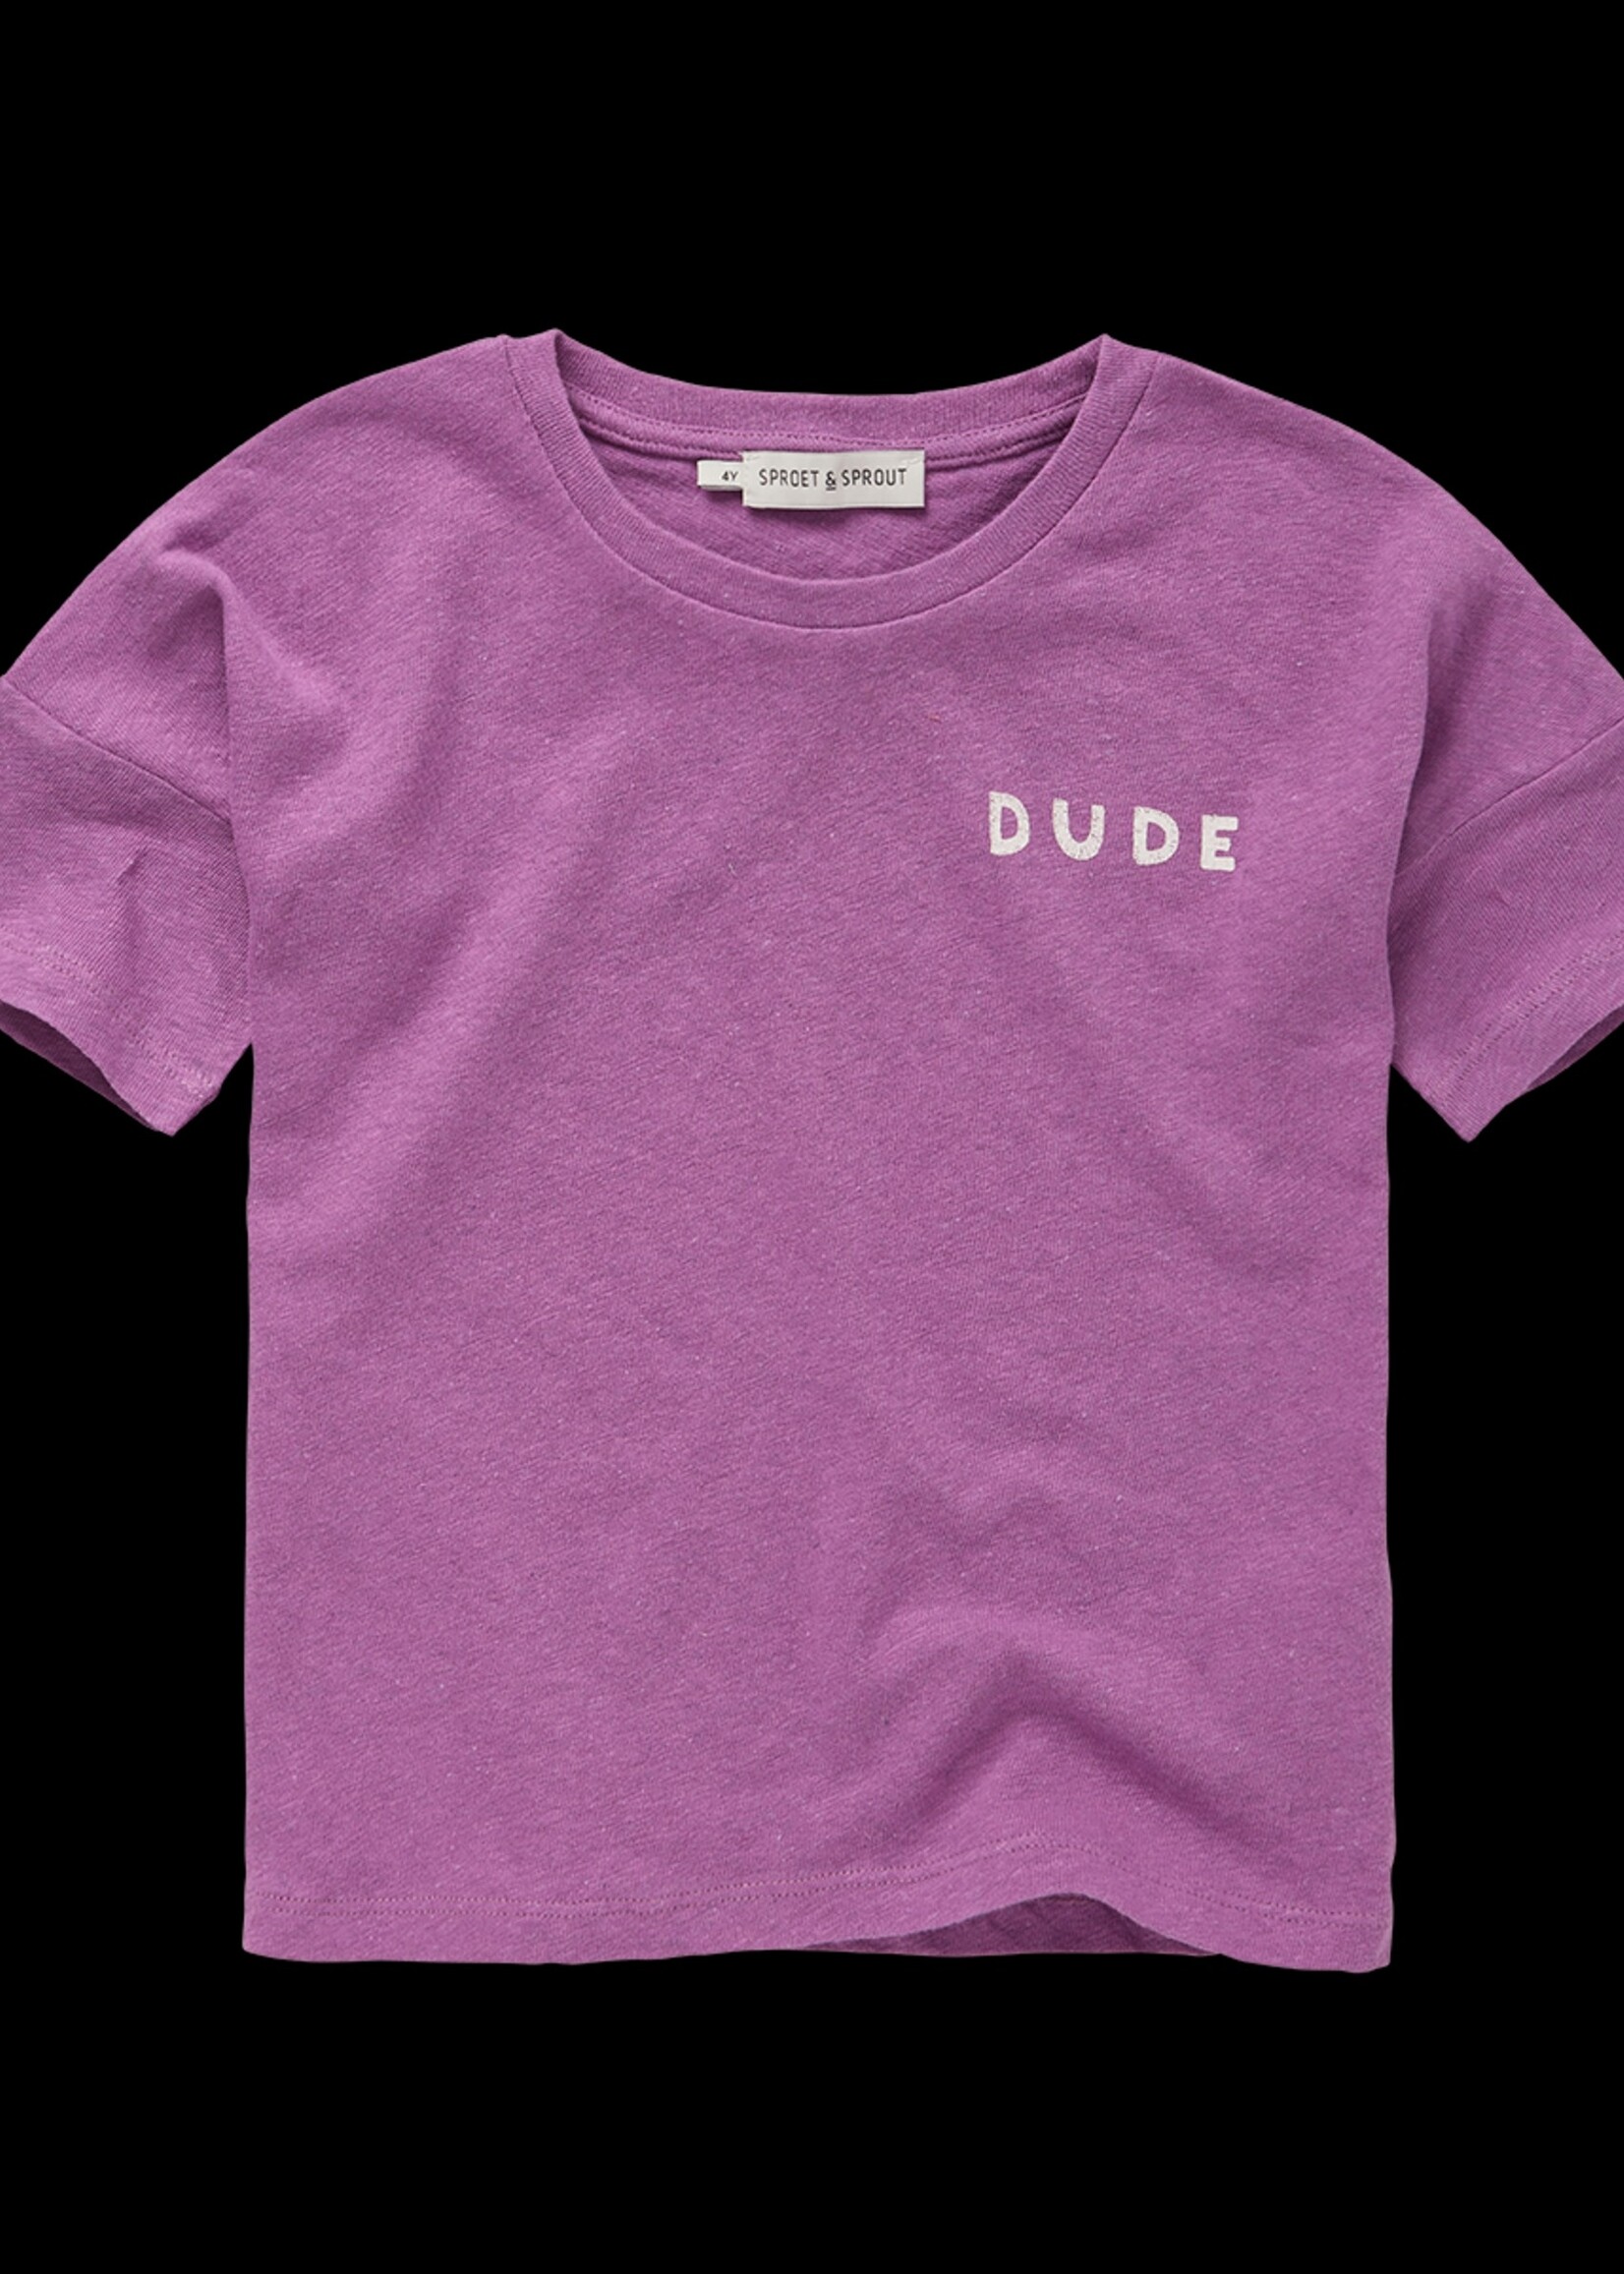 Sproet&Sprout Sproet&Sprout | T-shirt linen Dude – Purple